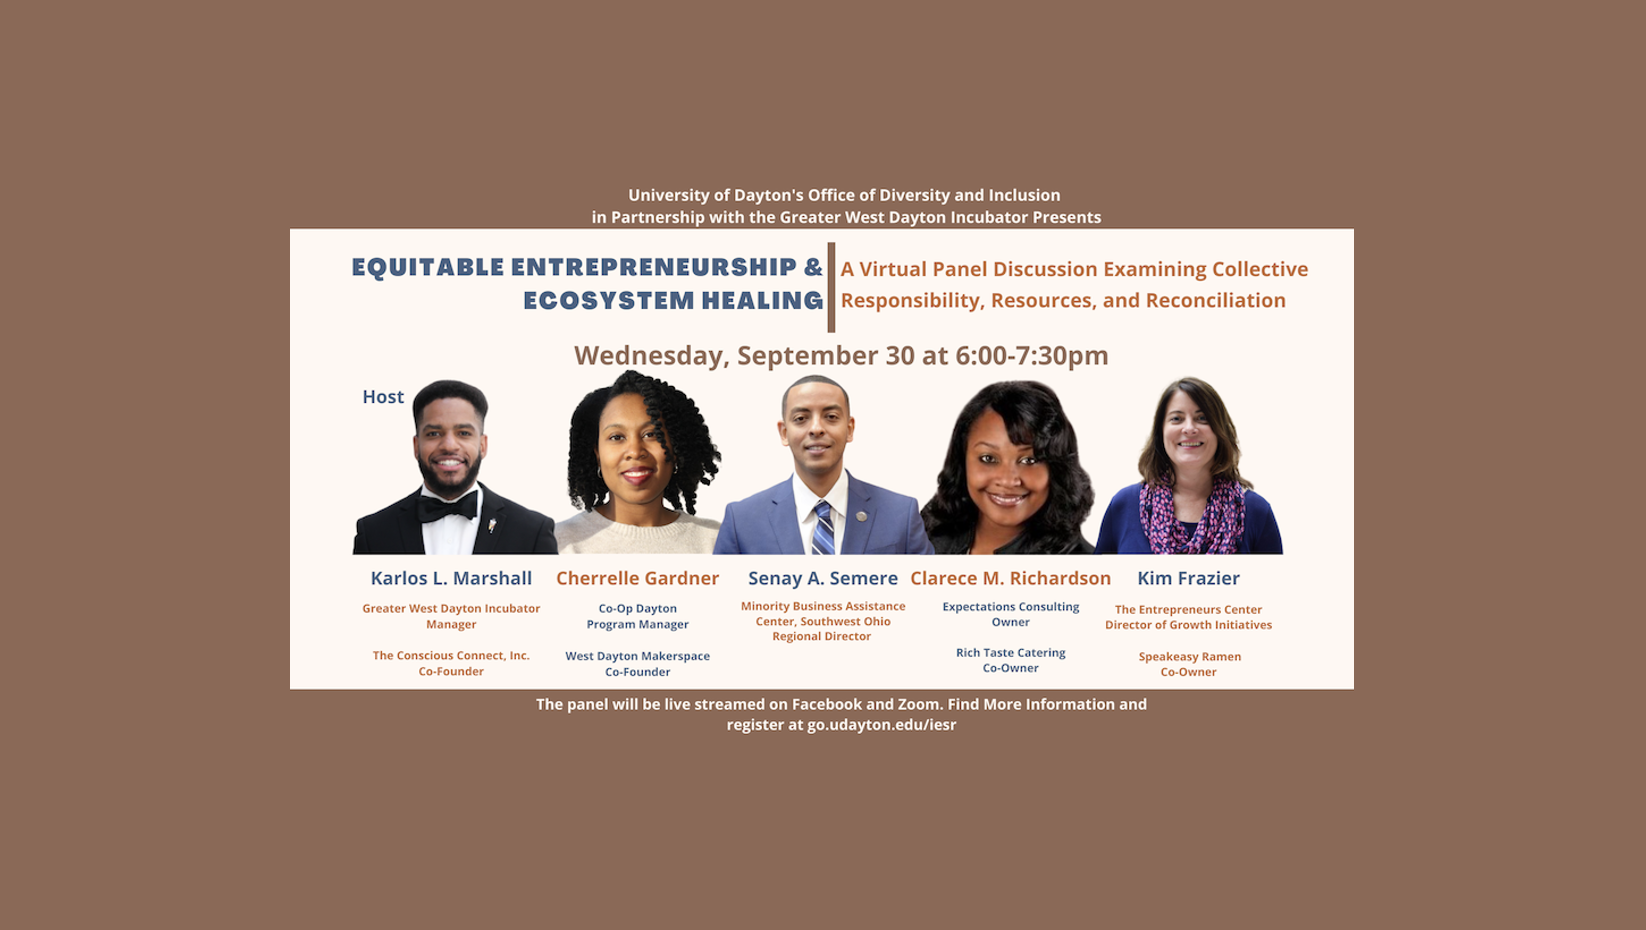 Five panelists featured in the Equitable Entrepreneurship & Ecosystem Healing panel.